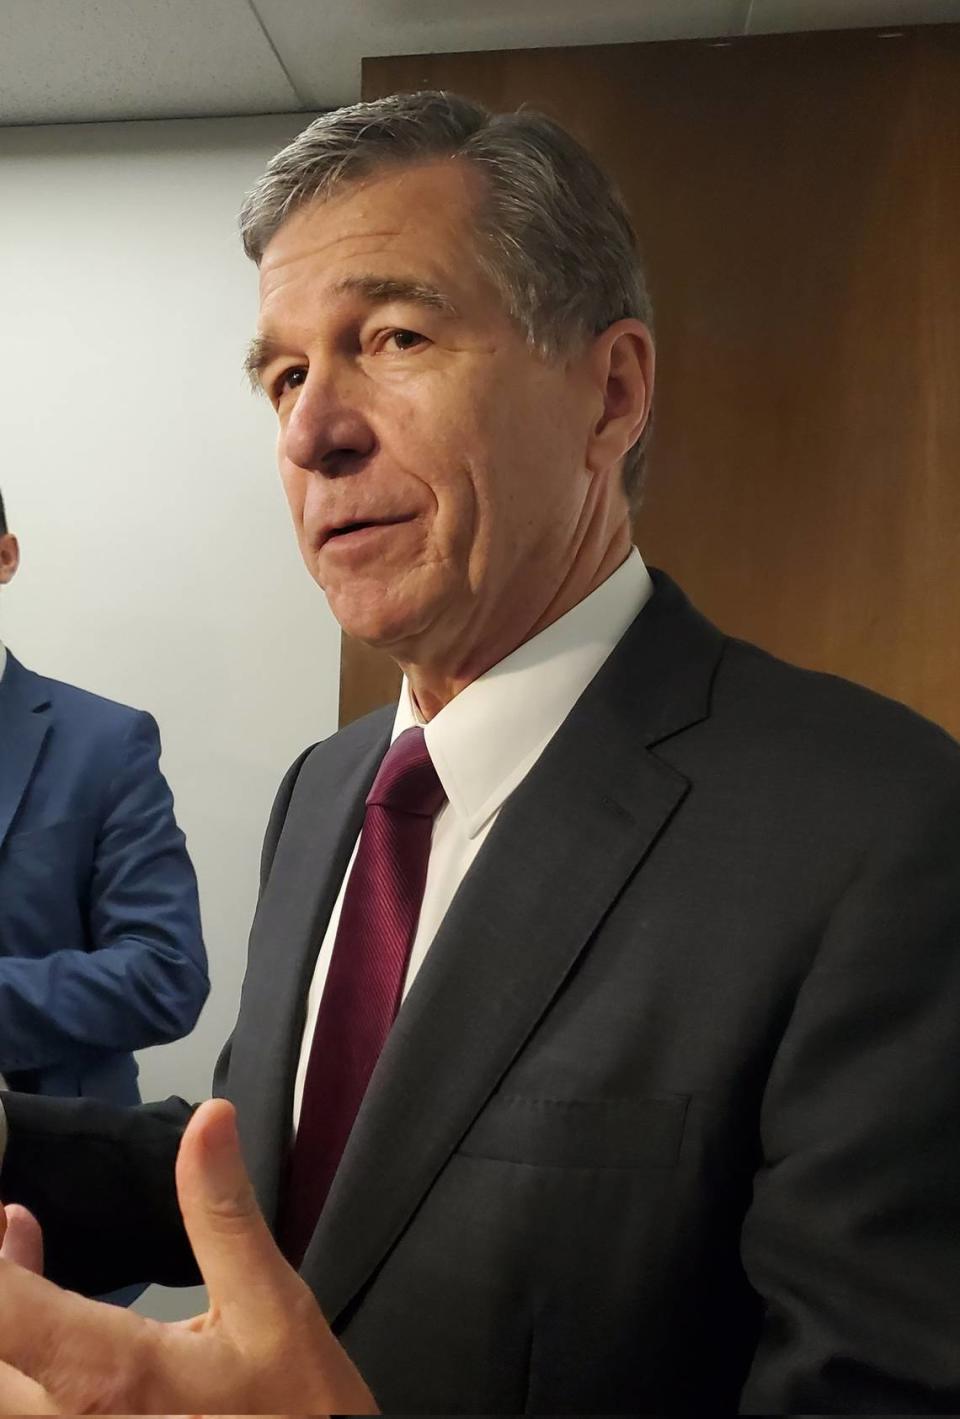 North Carolina Gov. Roy Cooper talks to reporters after a Council of State meeting on Tuesday, June 7, 2022 at the Department of Transportation in downtown Raleigh.